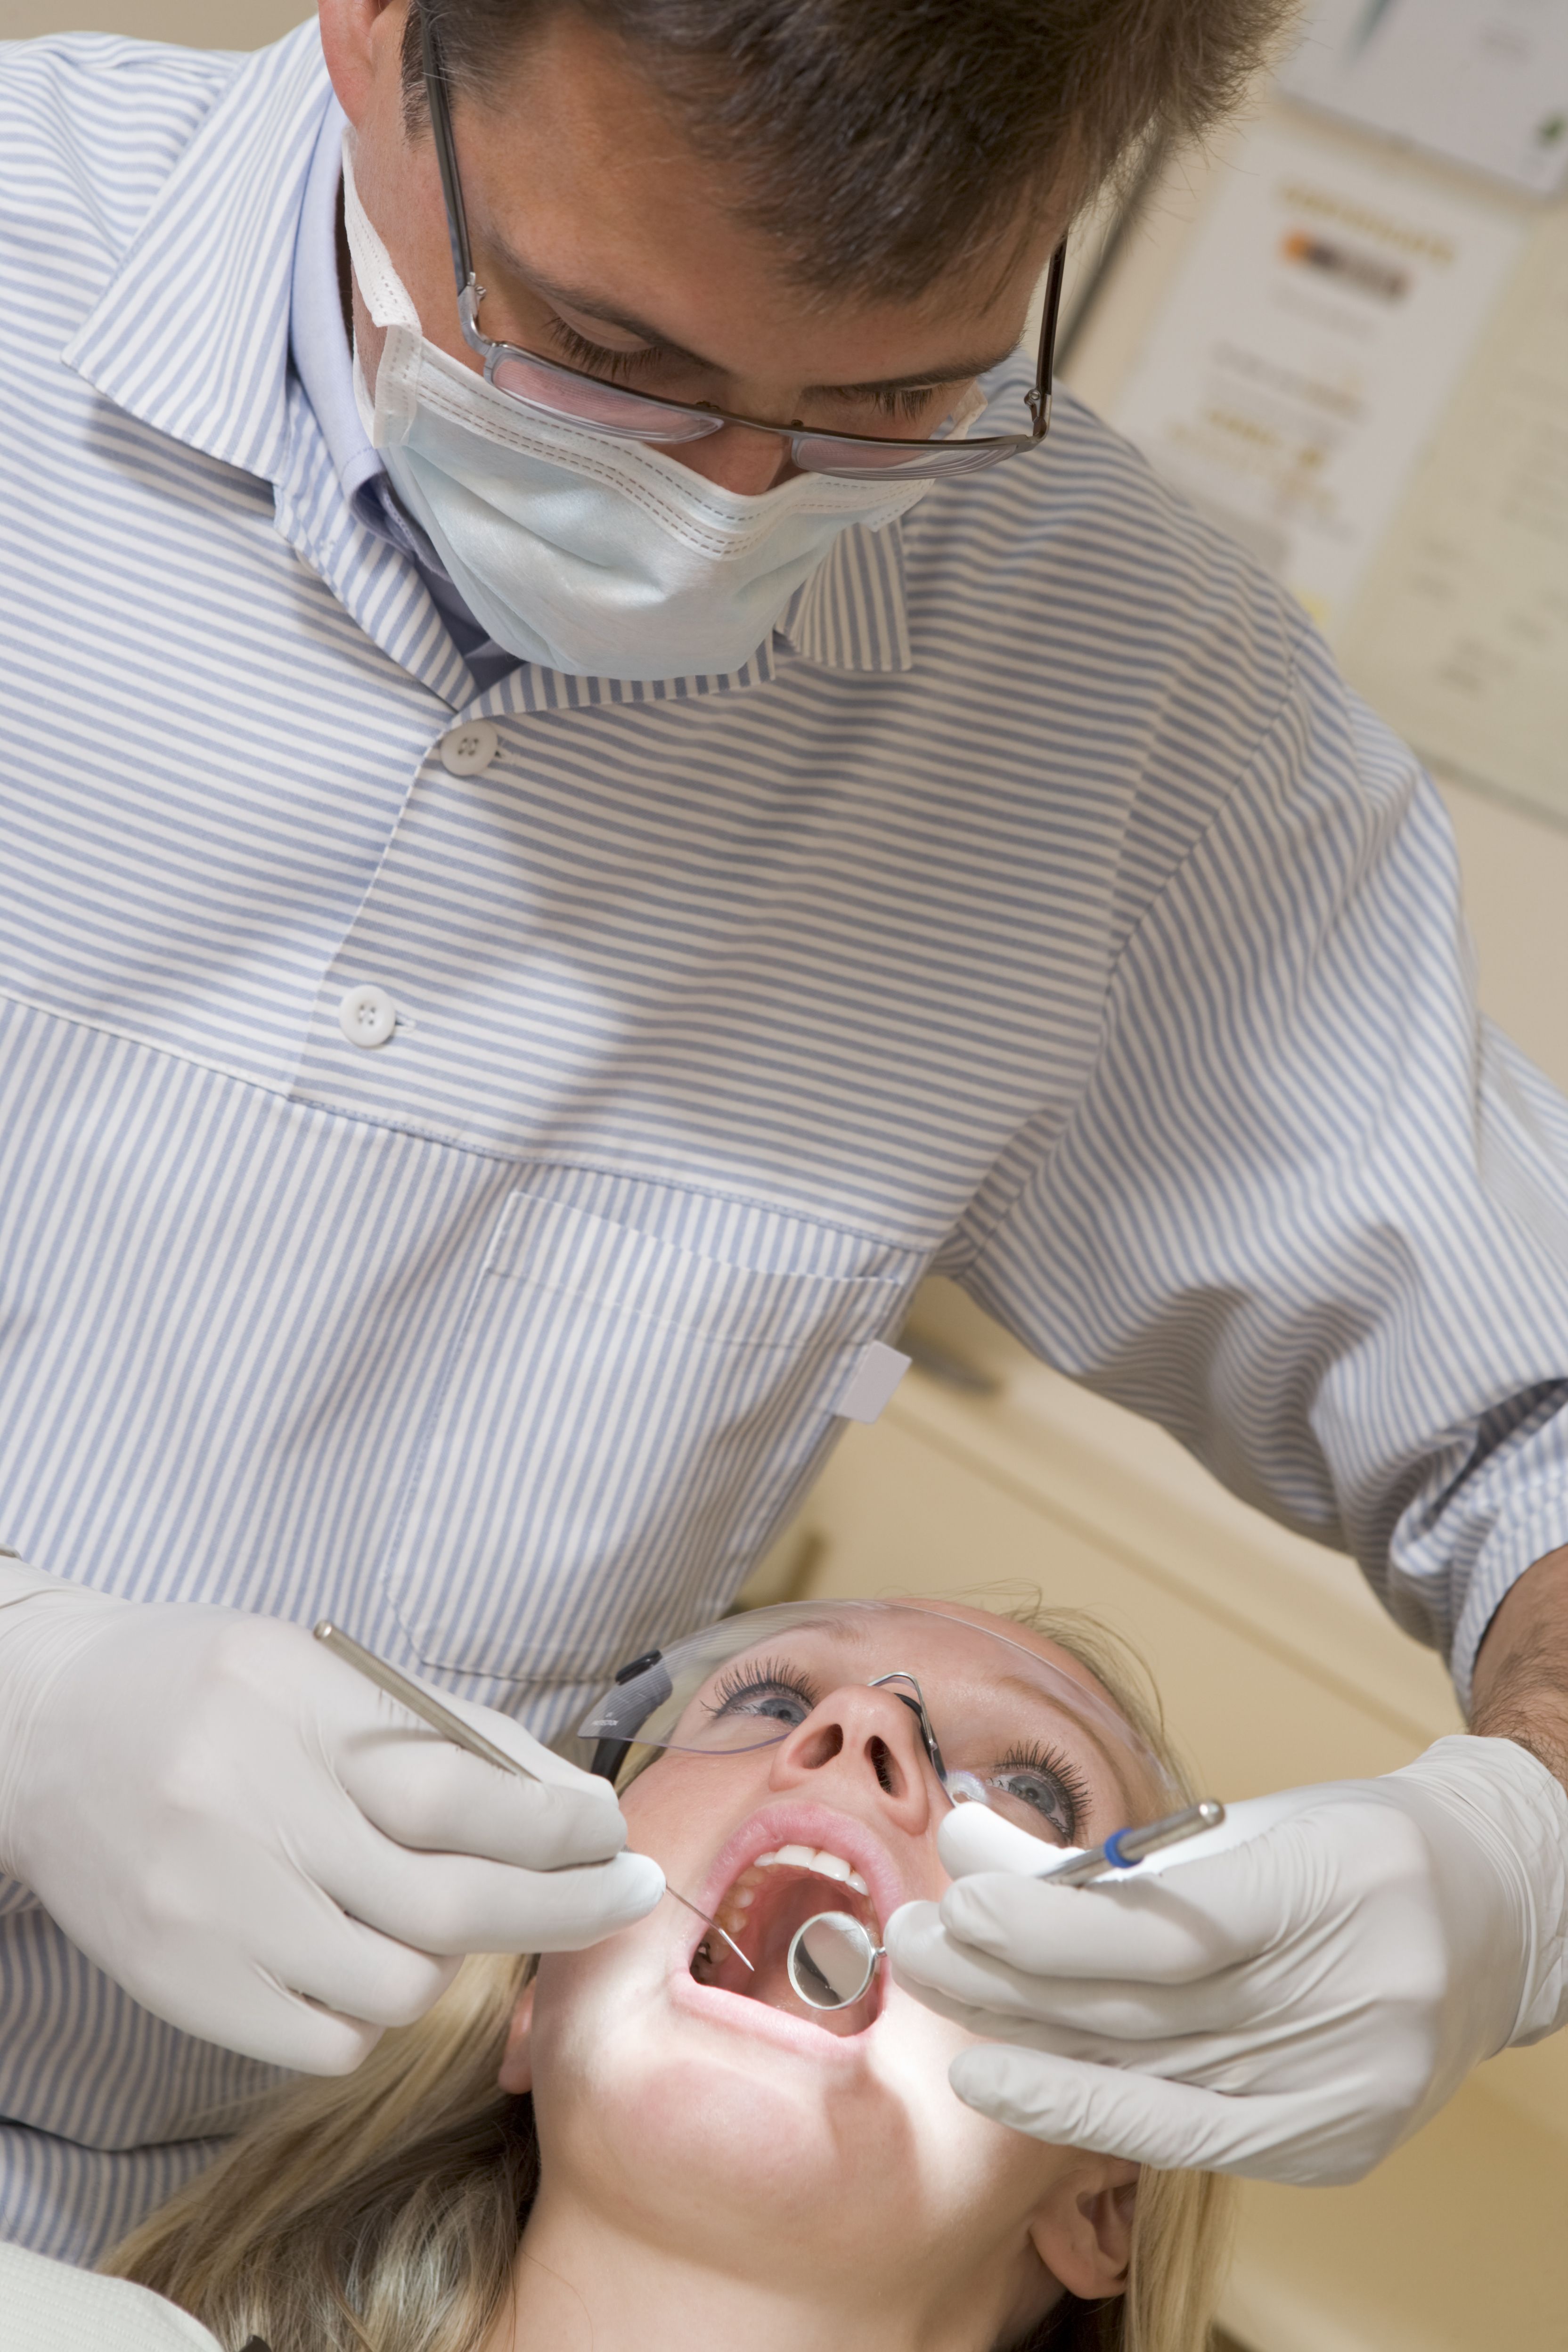 Dental Cleaning in Baltimore